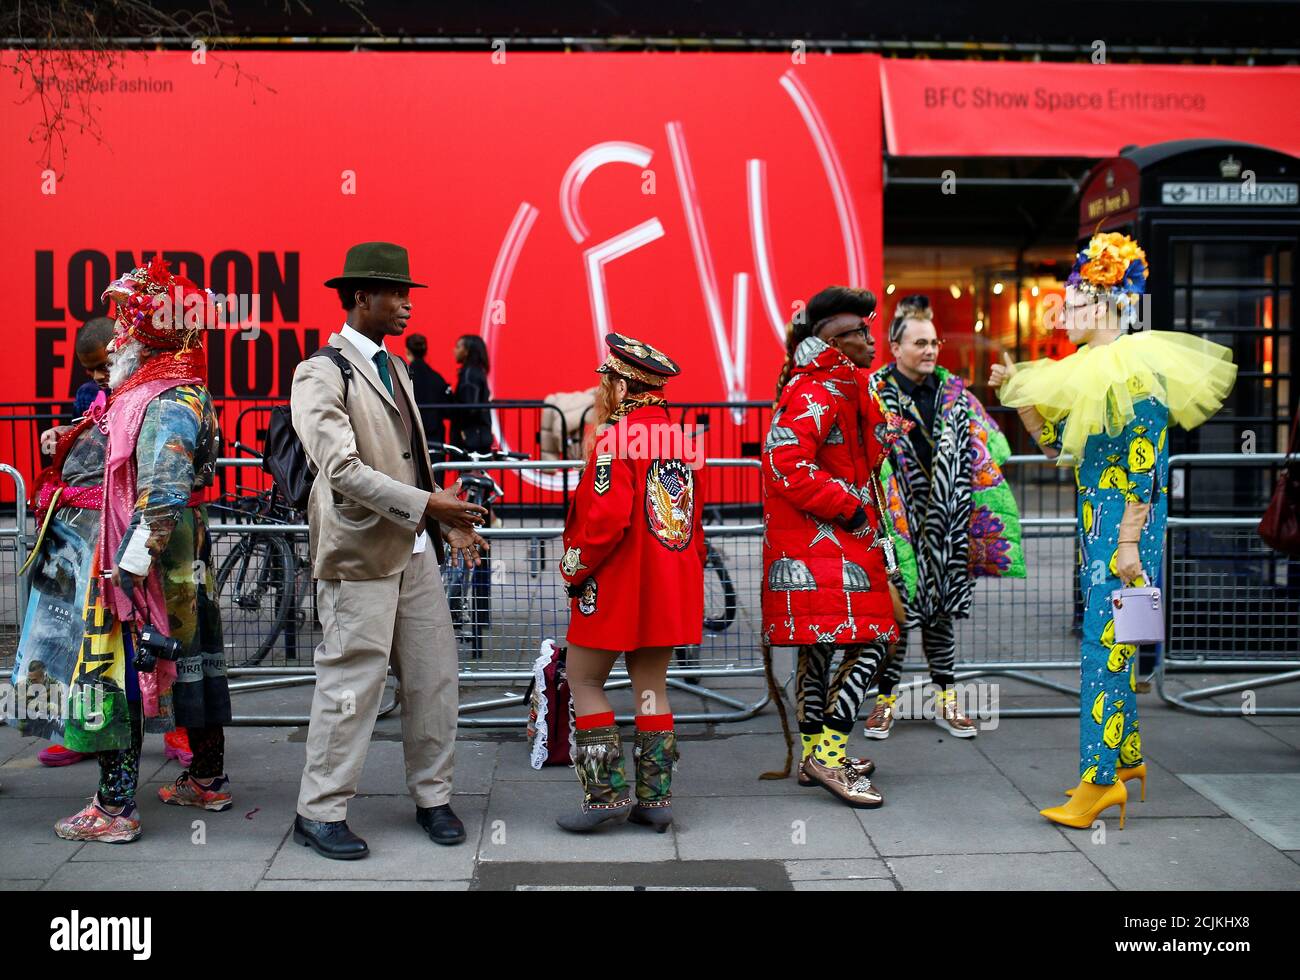 Fashionistas gather outside the BFC Showspace during London Fashion Week Women's A/W19 in London, Britain February 15, 2019. REUTERS/Henry Nicholls Stock Photo